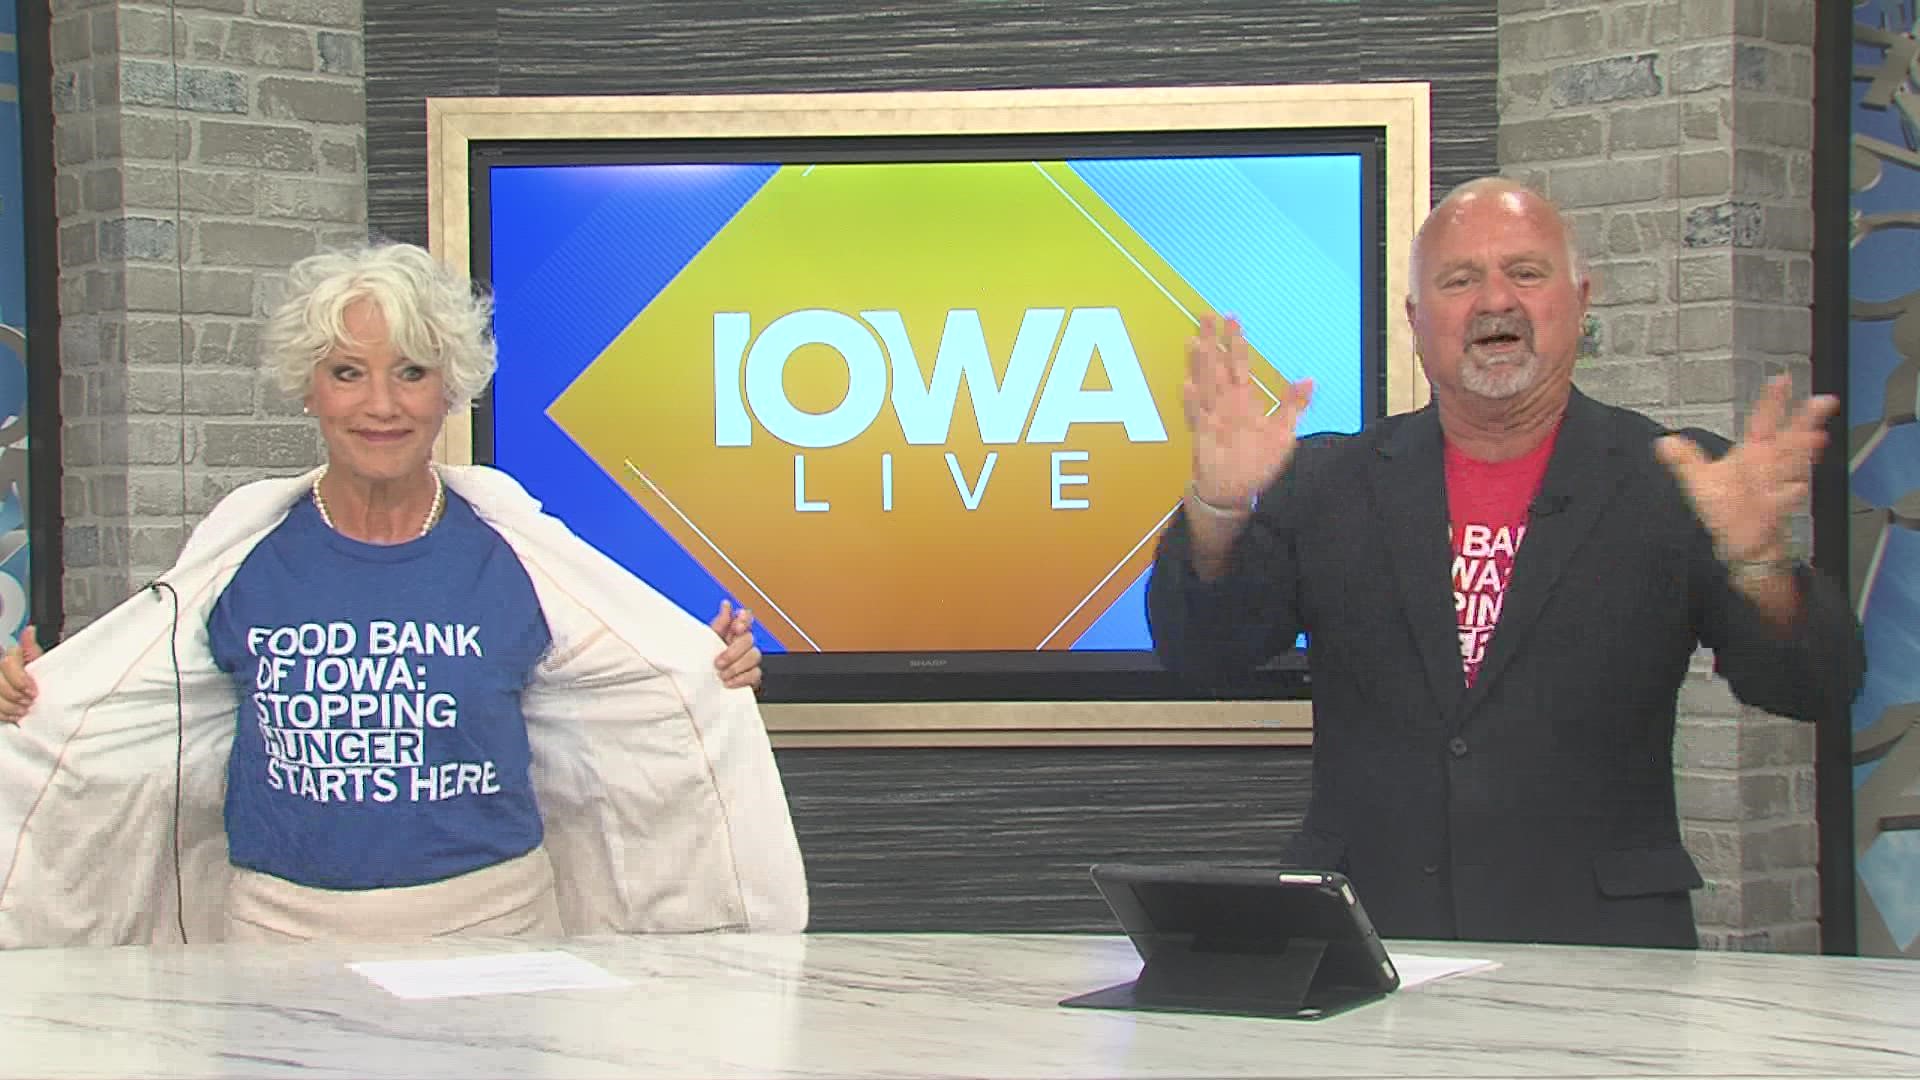 Food Bank of Iowa CEO Michelle Book reports on the success of the 7th Annual Smoke Out Hunger Event Sunday July 31st with an amazing crowd and $86K being raised!